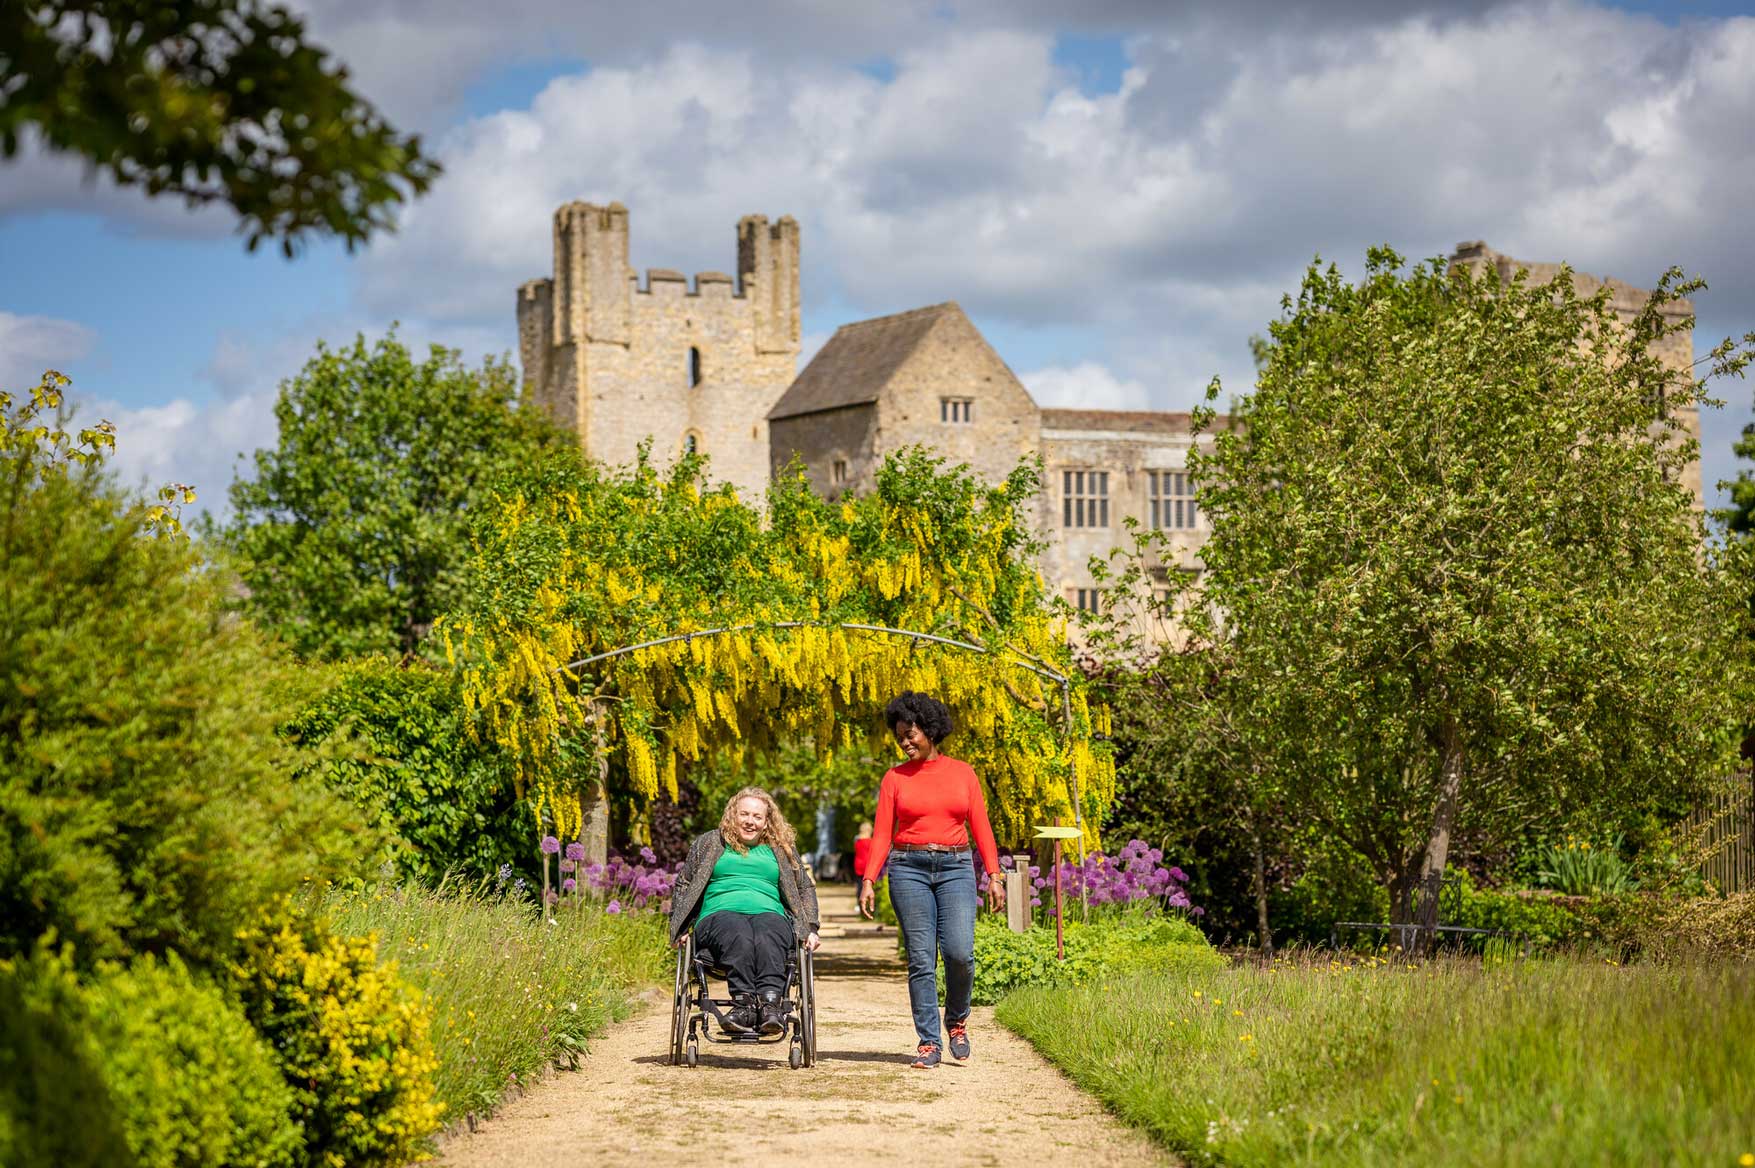 Two people, one using a wheelchair and the other walking, heading along a pathway under a flower-laden arch, with a historic castle in the background on a sunny day. Credit Visit Britain/Peter Kindersley.